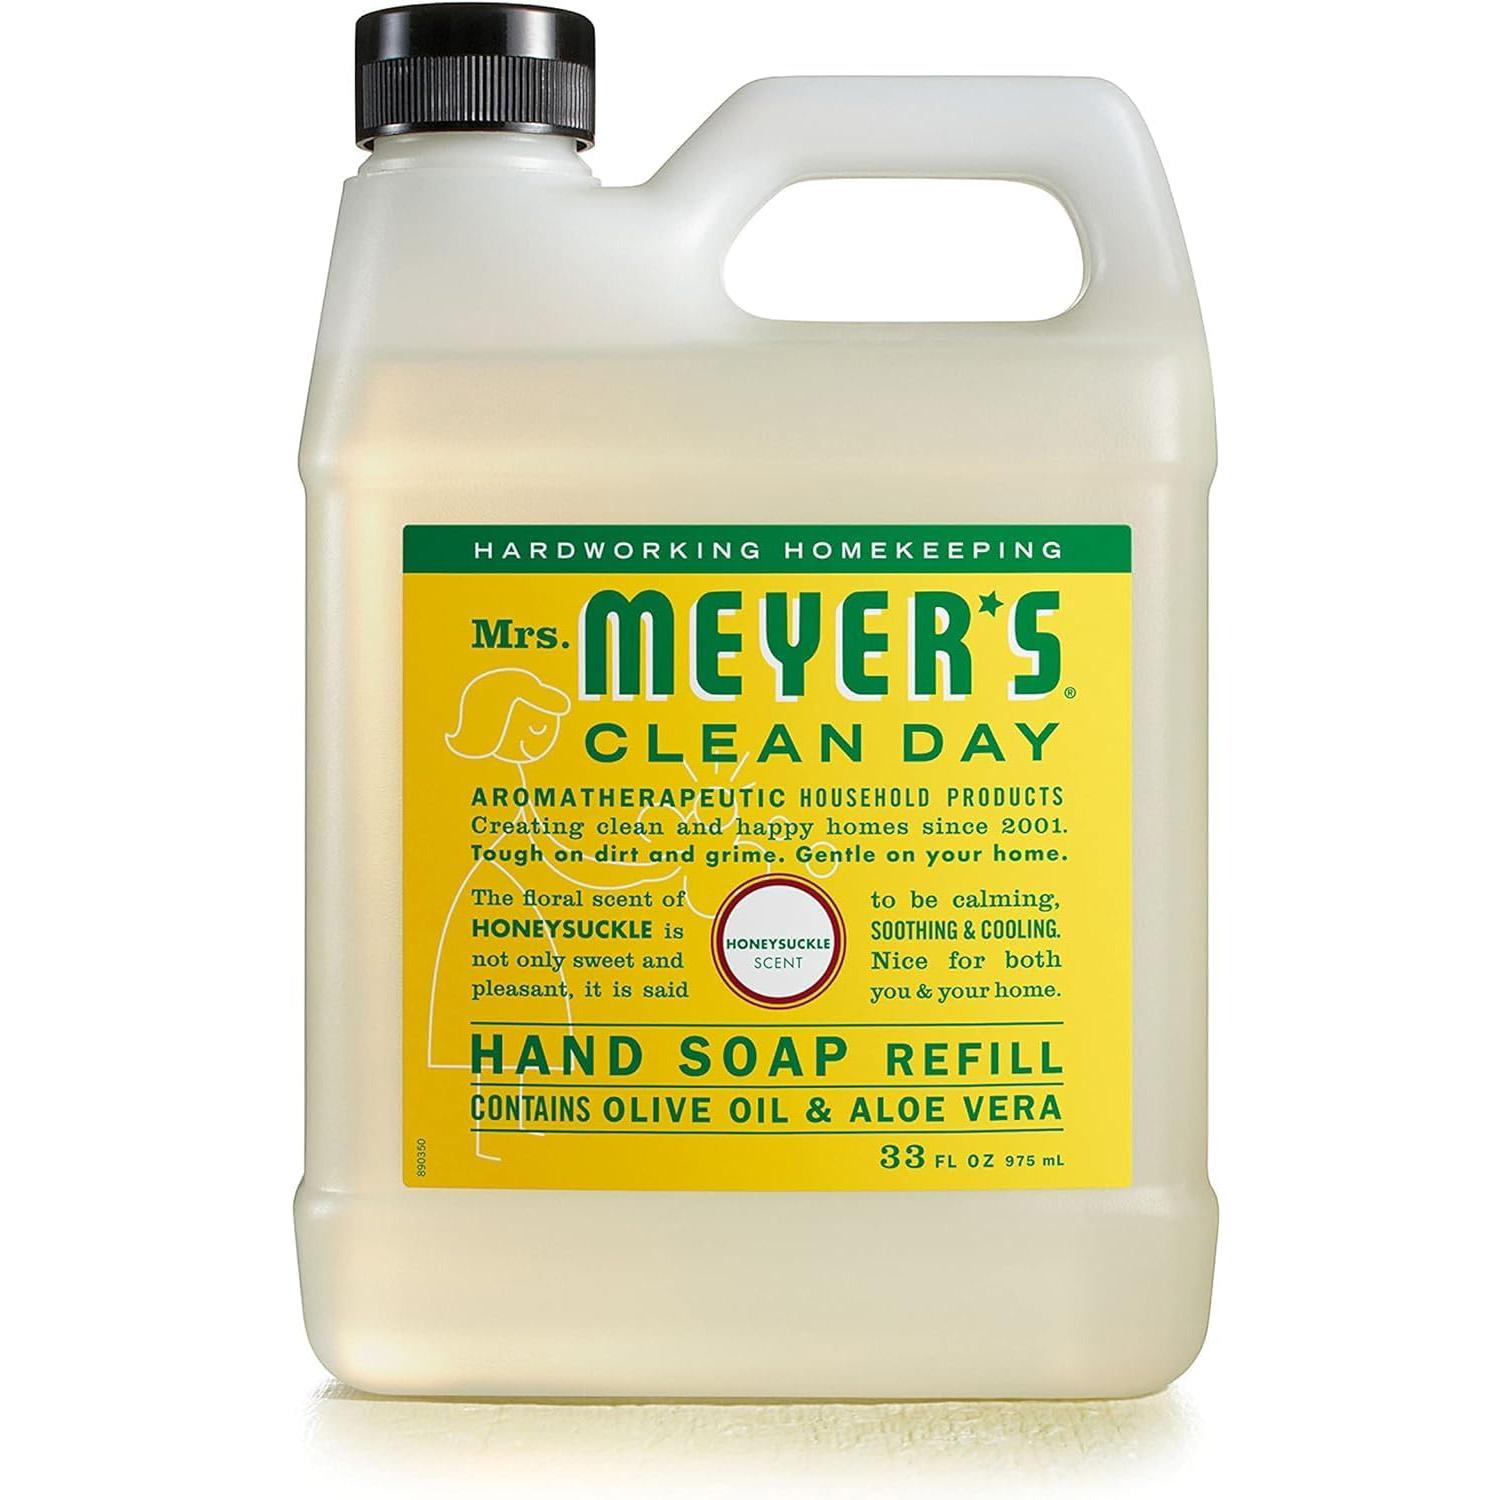 Mrs Meyers Clean Day Liquid Hand Soap Refill Honeysuckle for $5.86